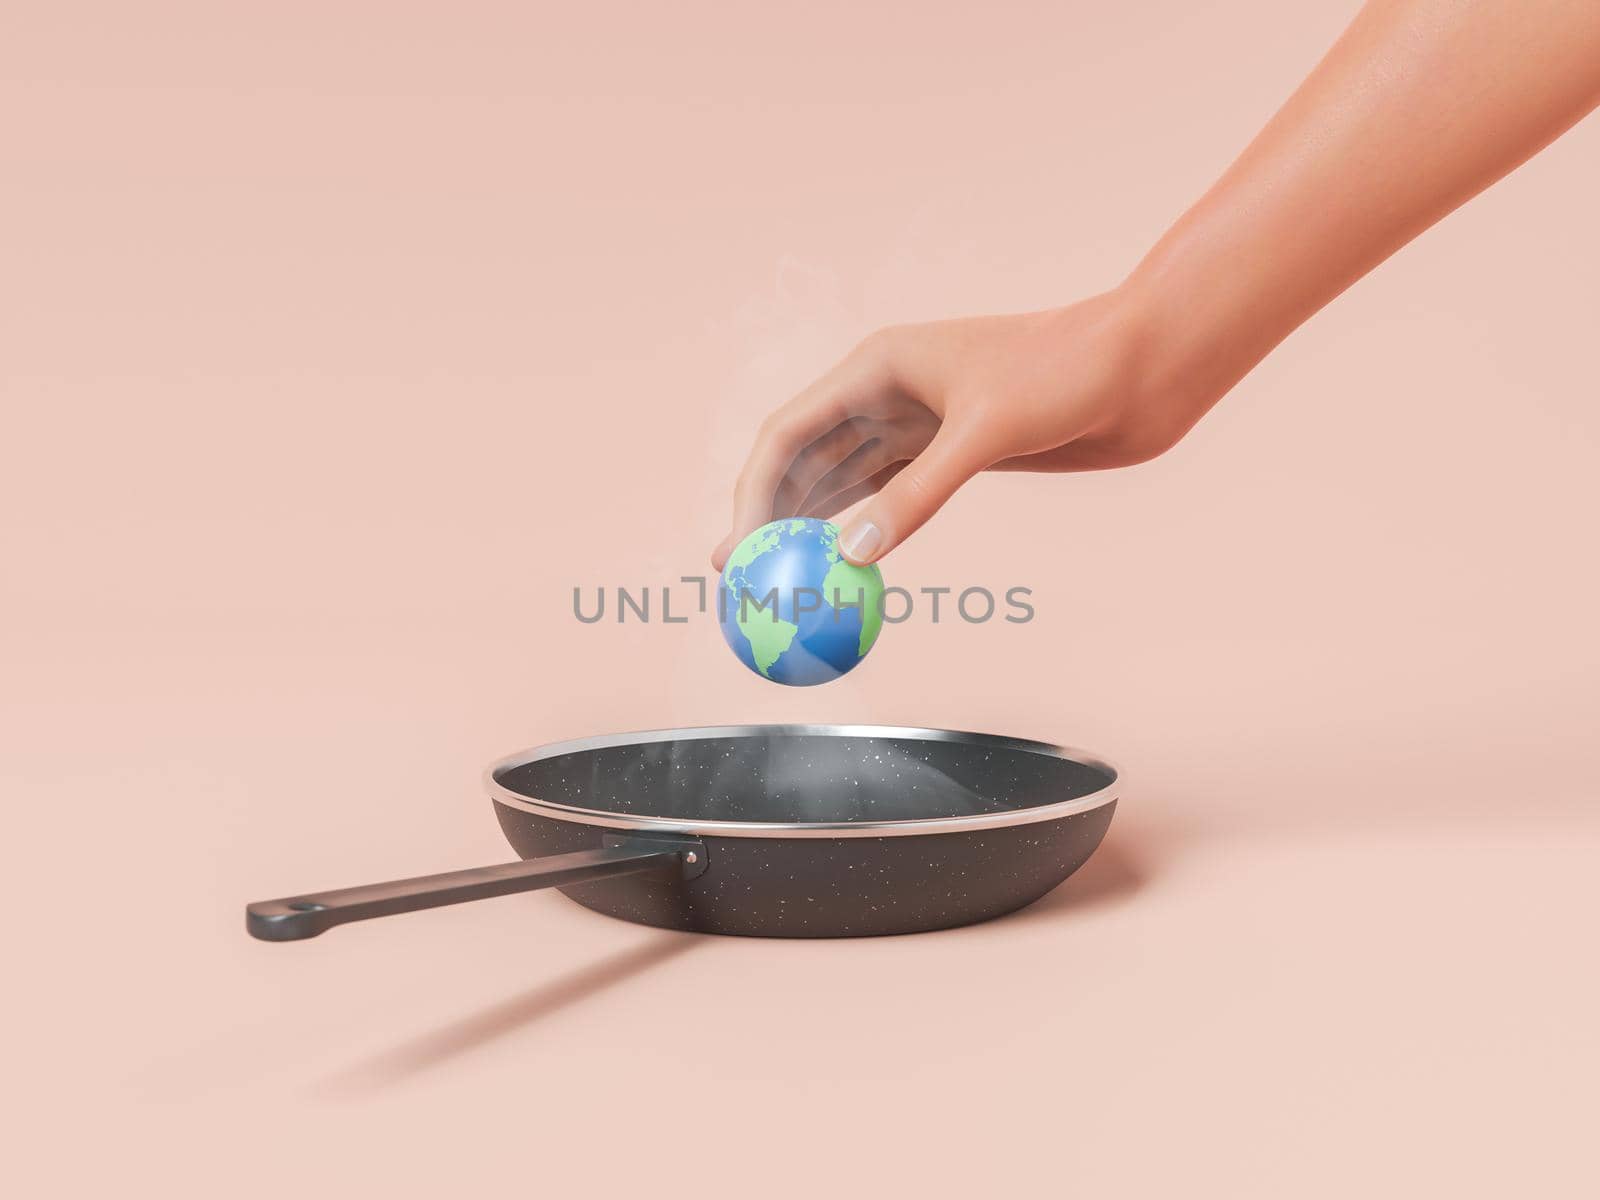 Hand holding planet over hot frying pan by asolano